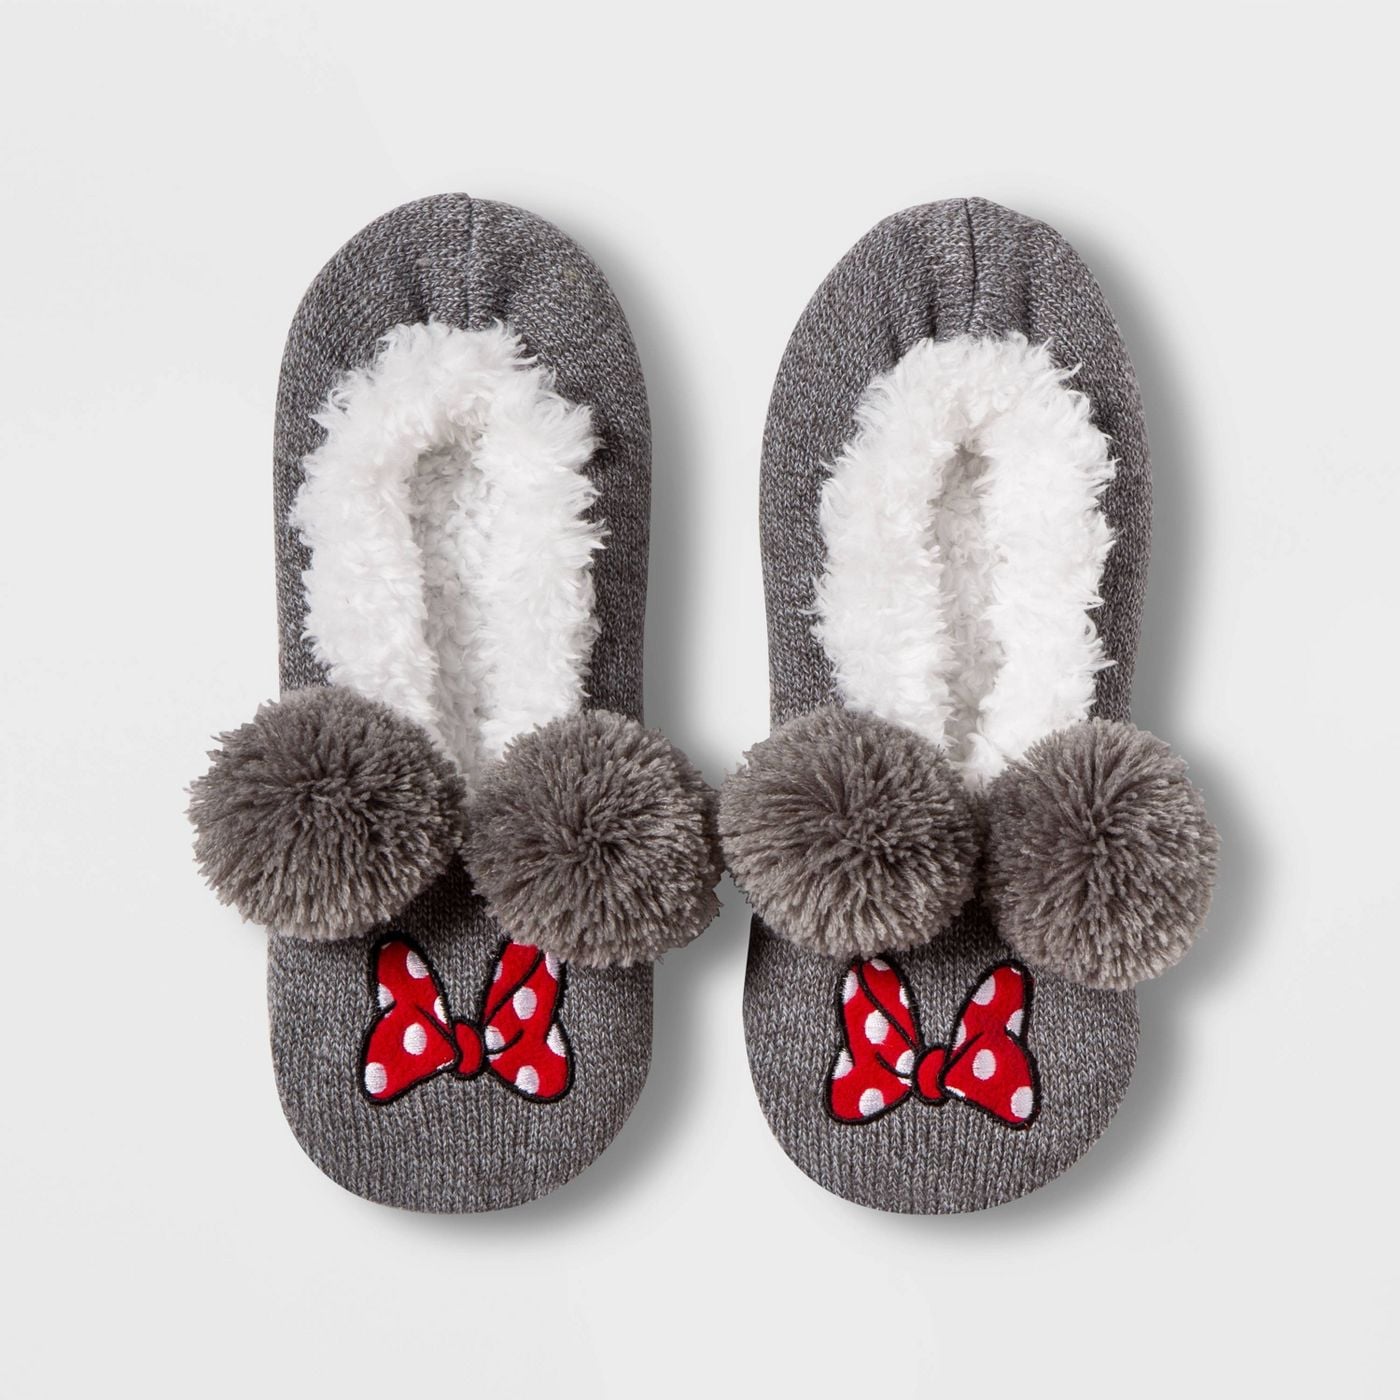 minnie mouse slippers adults